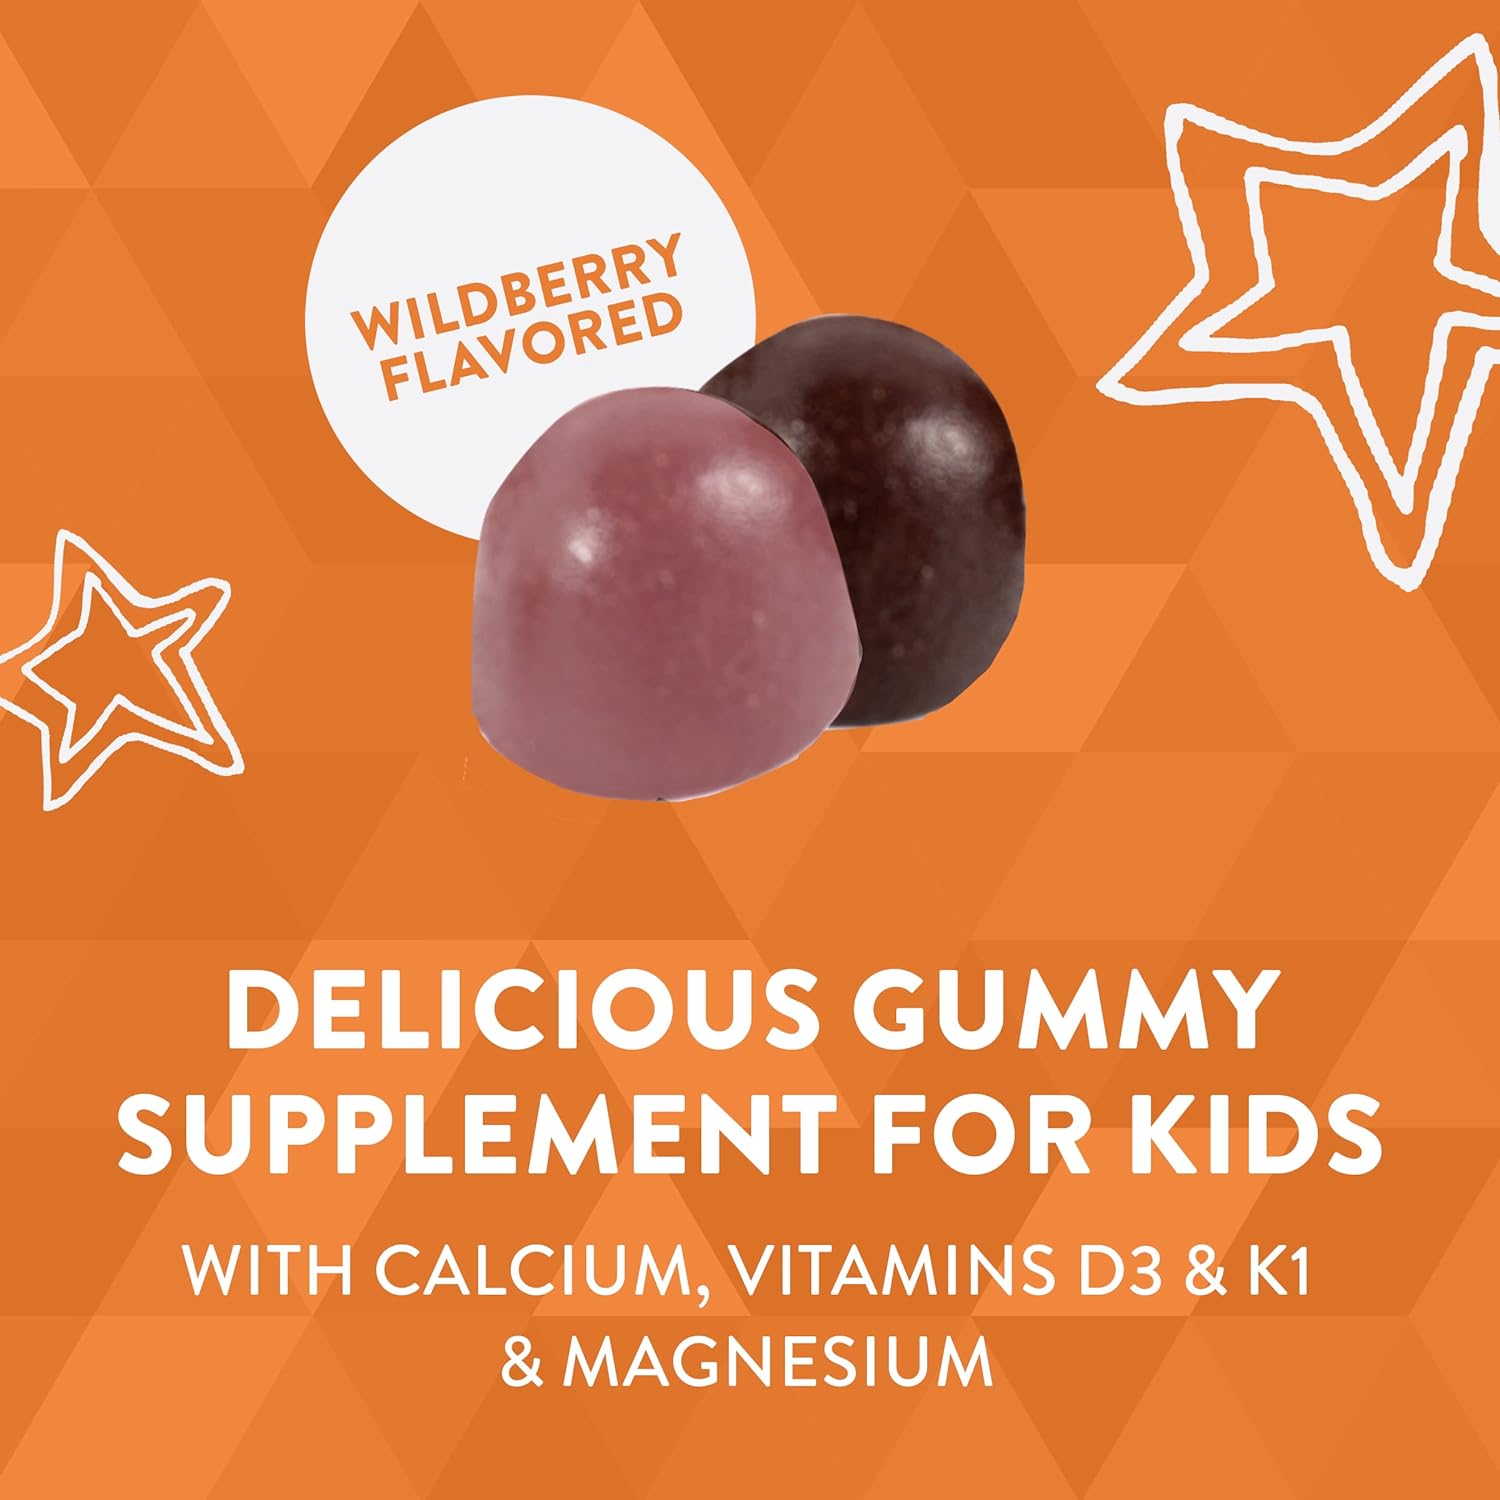 Natures Way Kids Growing Bones  Muscles With Calcium  Vitamin D, Ages 2 And Over, Wildberry Flavored, 60 Gummies